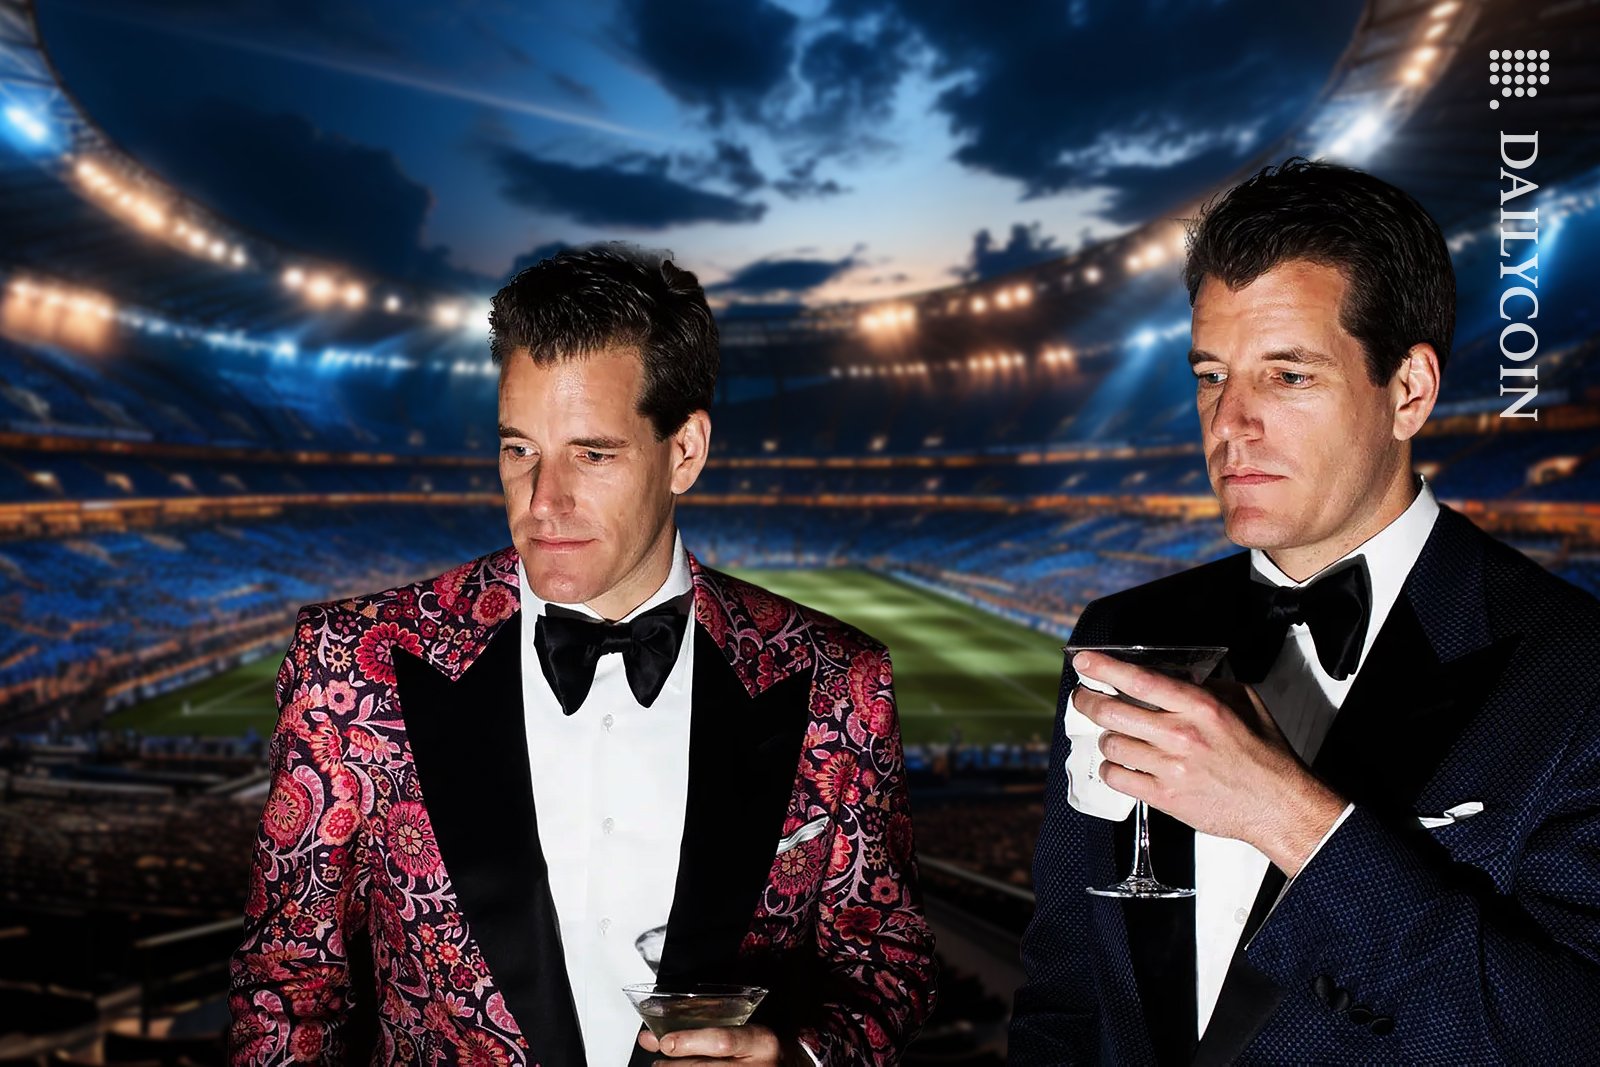 Winklevoss football watching evening is spoiled.